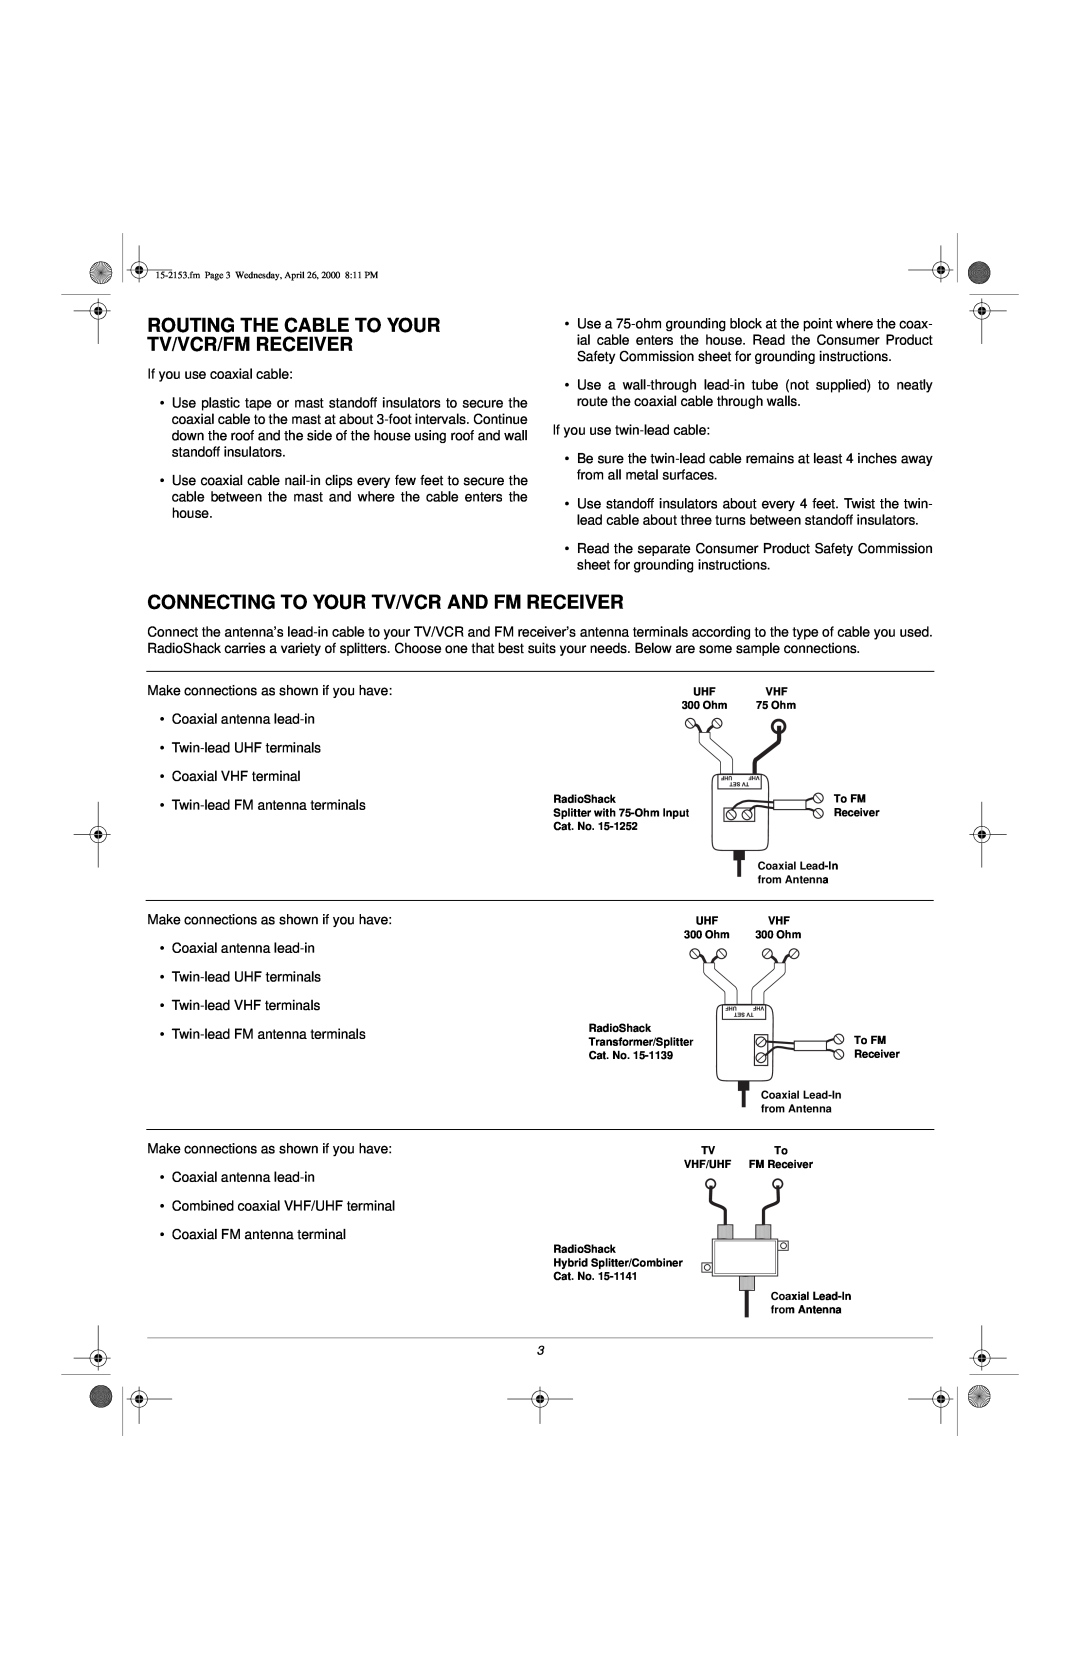 Radio Shack VU-110XR owner manual Routing The Cable To Your Tv/Vcr/Fm Receiver, Connecting To Your Tv/Vcr And Fm Receiver 